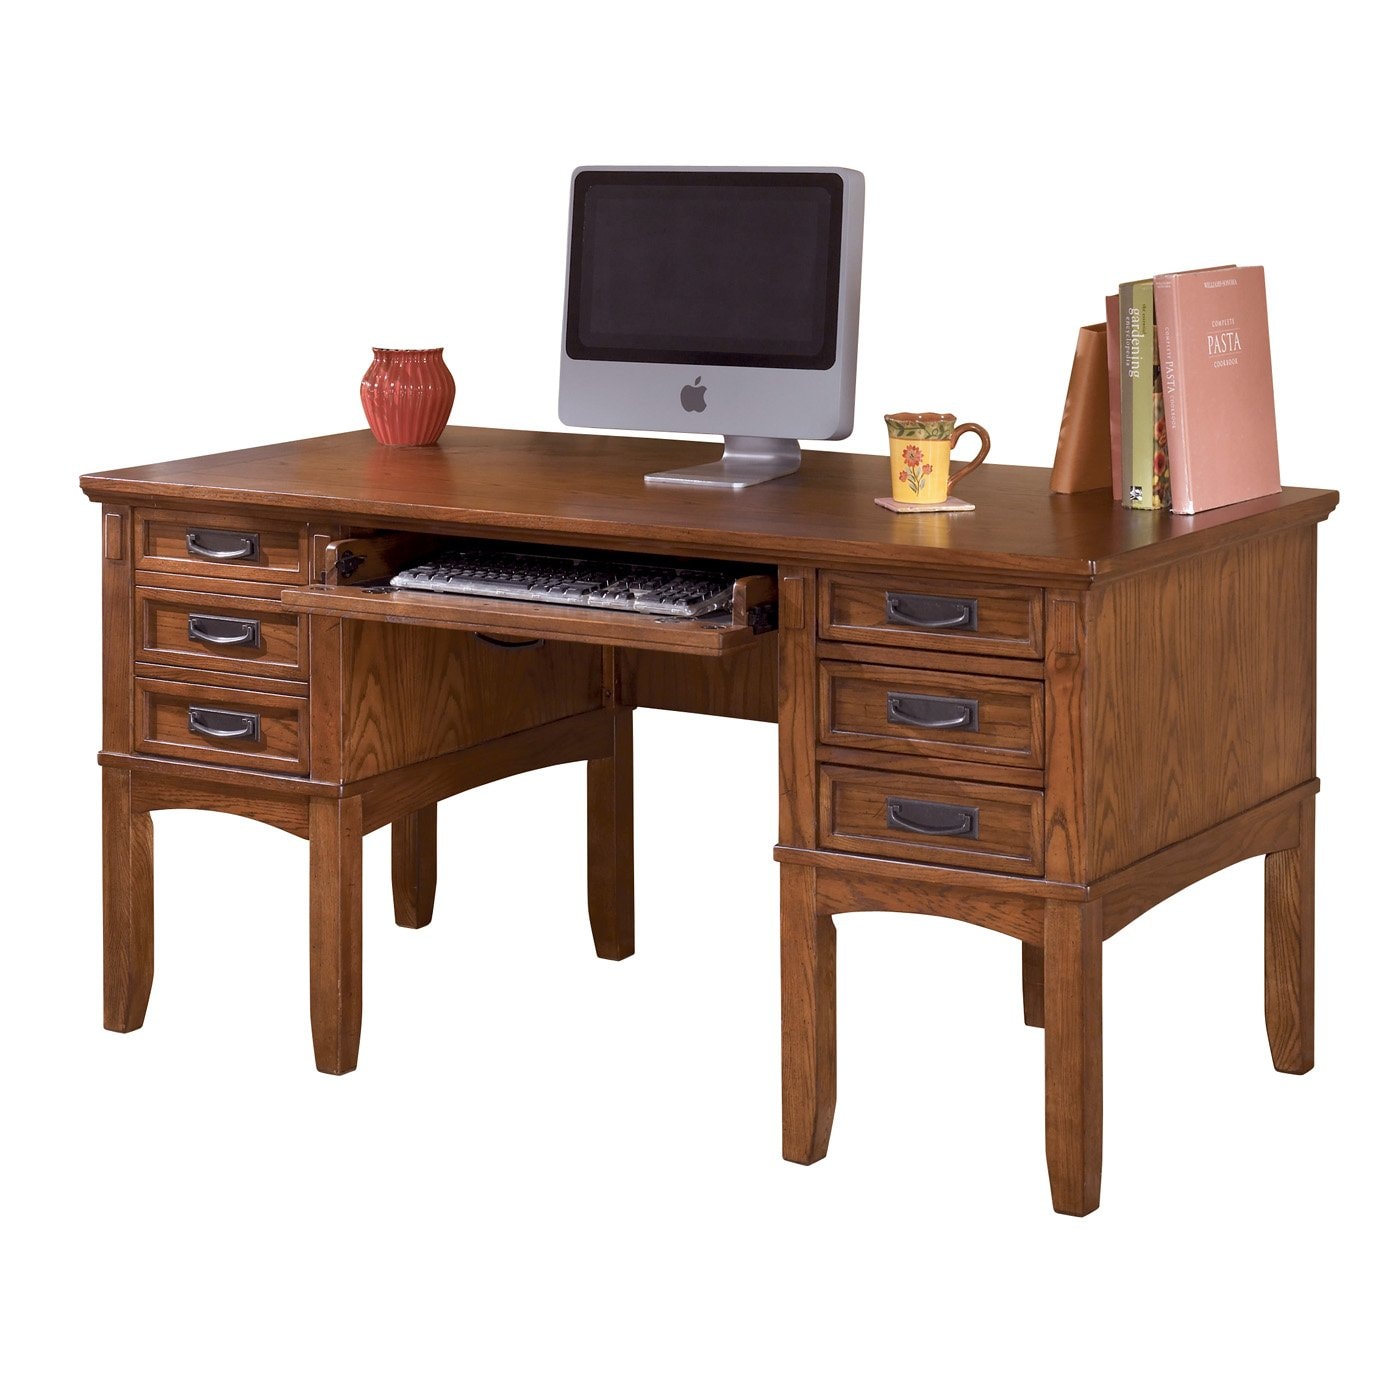 Home Office Hideaway Computer Desk Woodworking Plan from WOOD Magazine